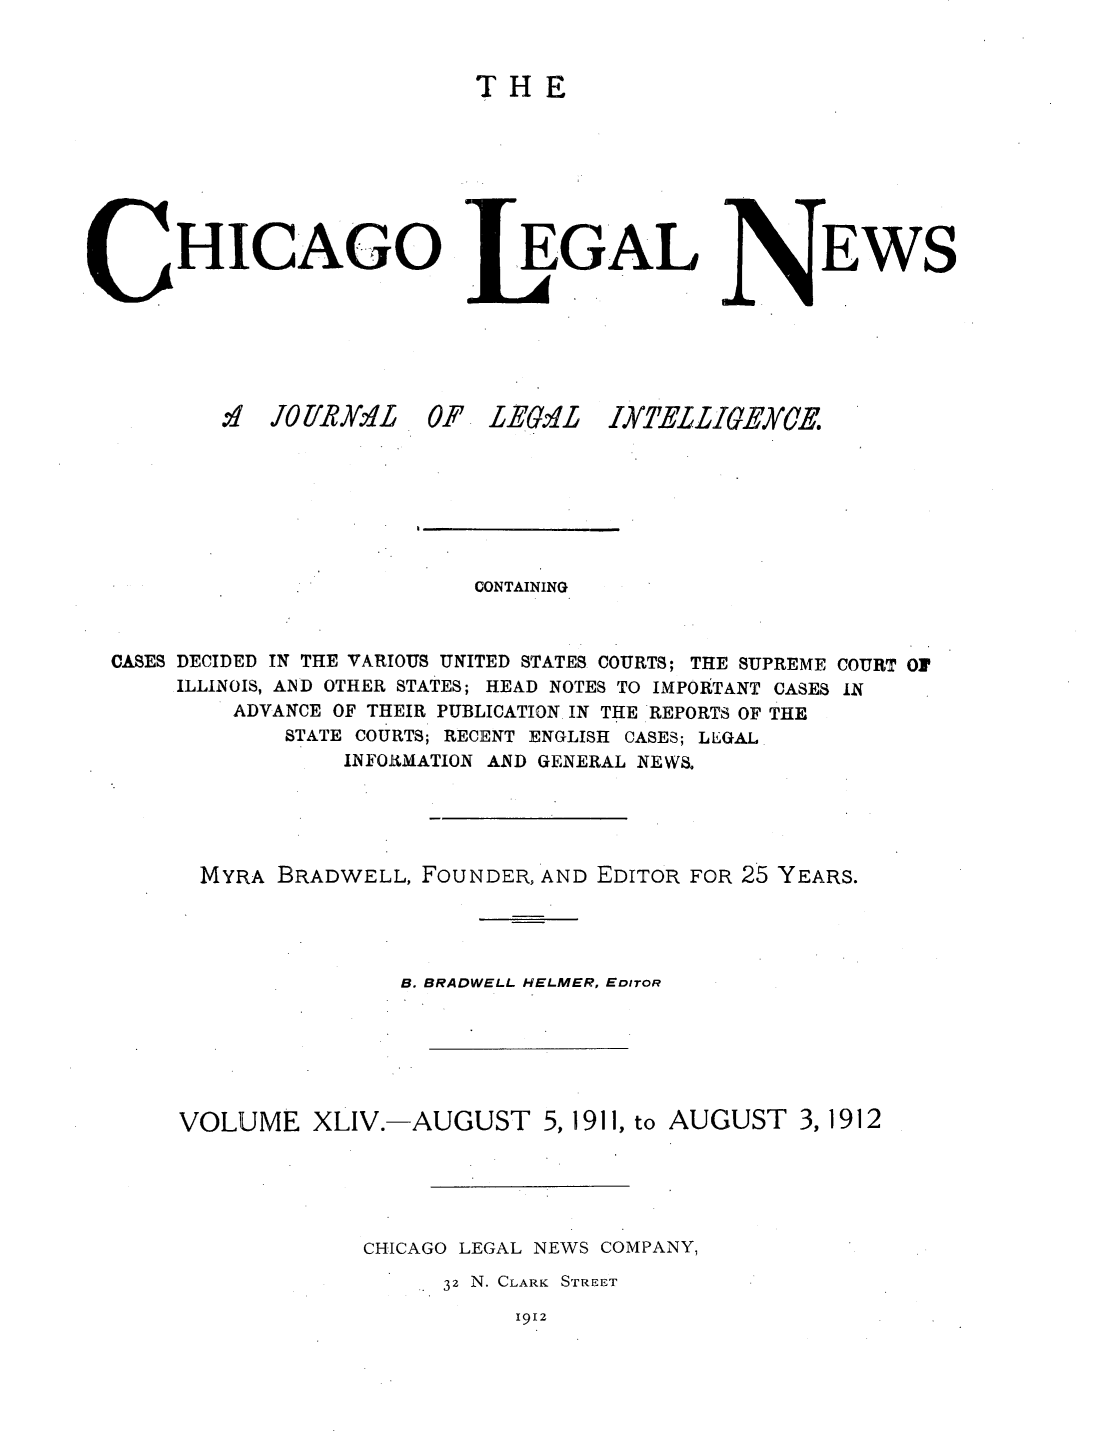 handle is hein.journals/chiclene44 and id is 1 raw text is: THE

HICAGO
,1 JOI'R9IL 0 .

.EGAL

P LEGAL

EWS

CONTAINING
CASES DECIDED IN THE VARIOUS UNITED STATES COURTS; THE SUPREME COURT Of
ILLINOIS, AND OTHER STATES; HEAD NOTES TO IMPORTANT CASES IN
ADVANCE OF THEIR PUBLICATION IN THE REPORTS OF THE
STATE COURTS; RECENT ENGLISH CASES; LEGAL
INFORMATION AND GENERAL NEWS.
MYRA BRADWELL, FOUNDER, AND EDITOR FOR 25 YEARS.
B. BRADWELL HELMER, EDITOR
VOLUME XLIV.-AUGUST 5, 1911, to AUGUST 3, 1912
CI-lCAGO LEGAL NEWS COMPANY,
32 N. CLARK STREET

1912

IXTELZIGEYCE.


